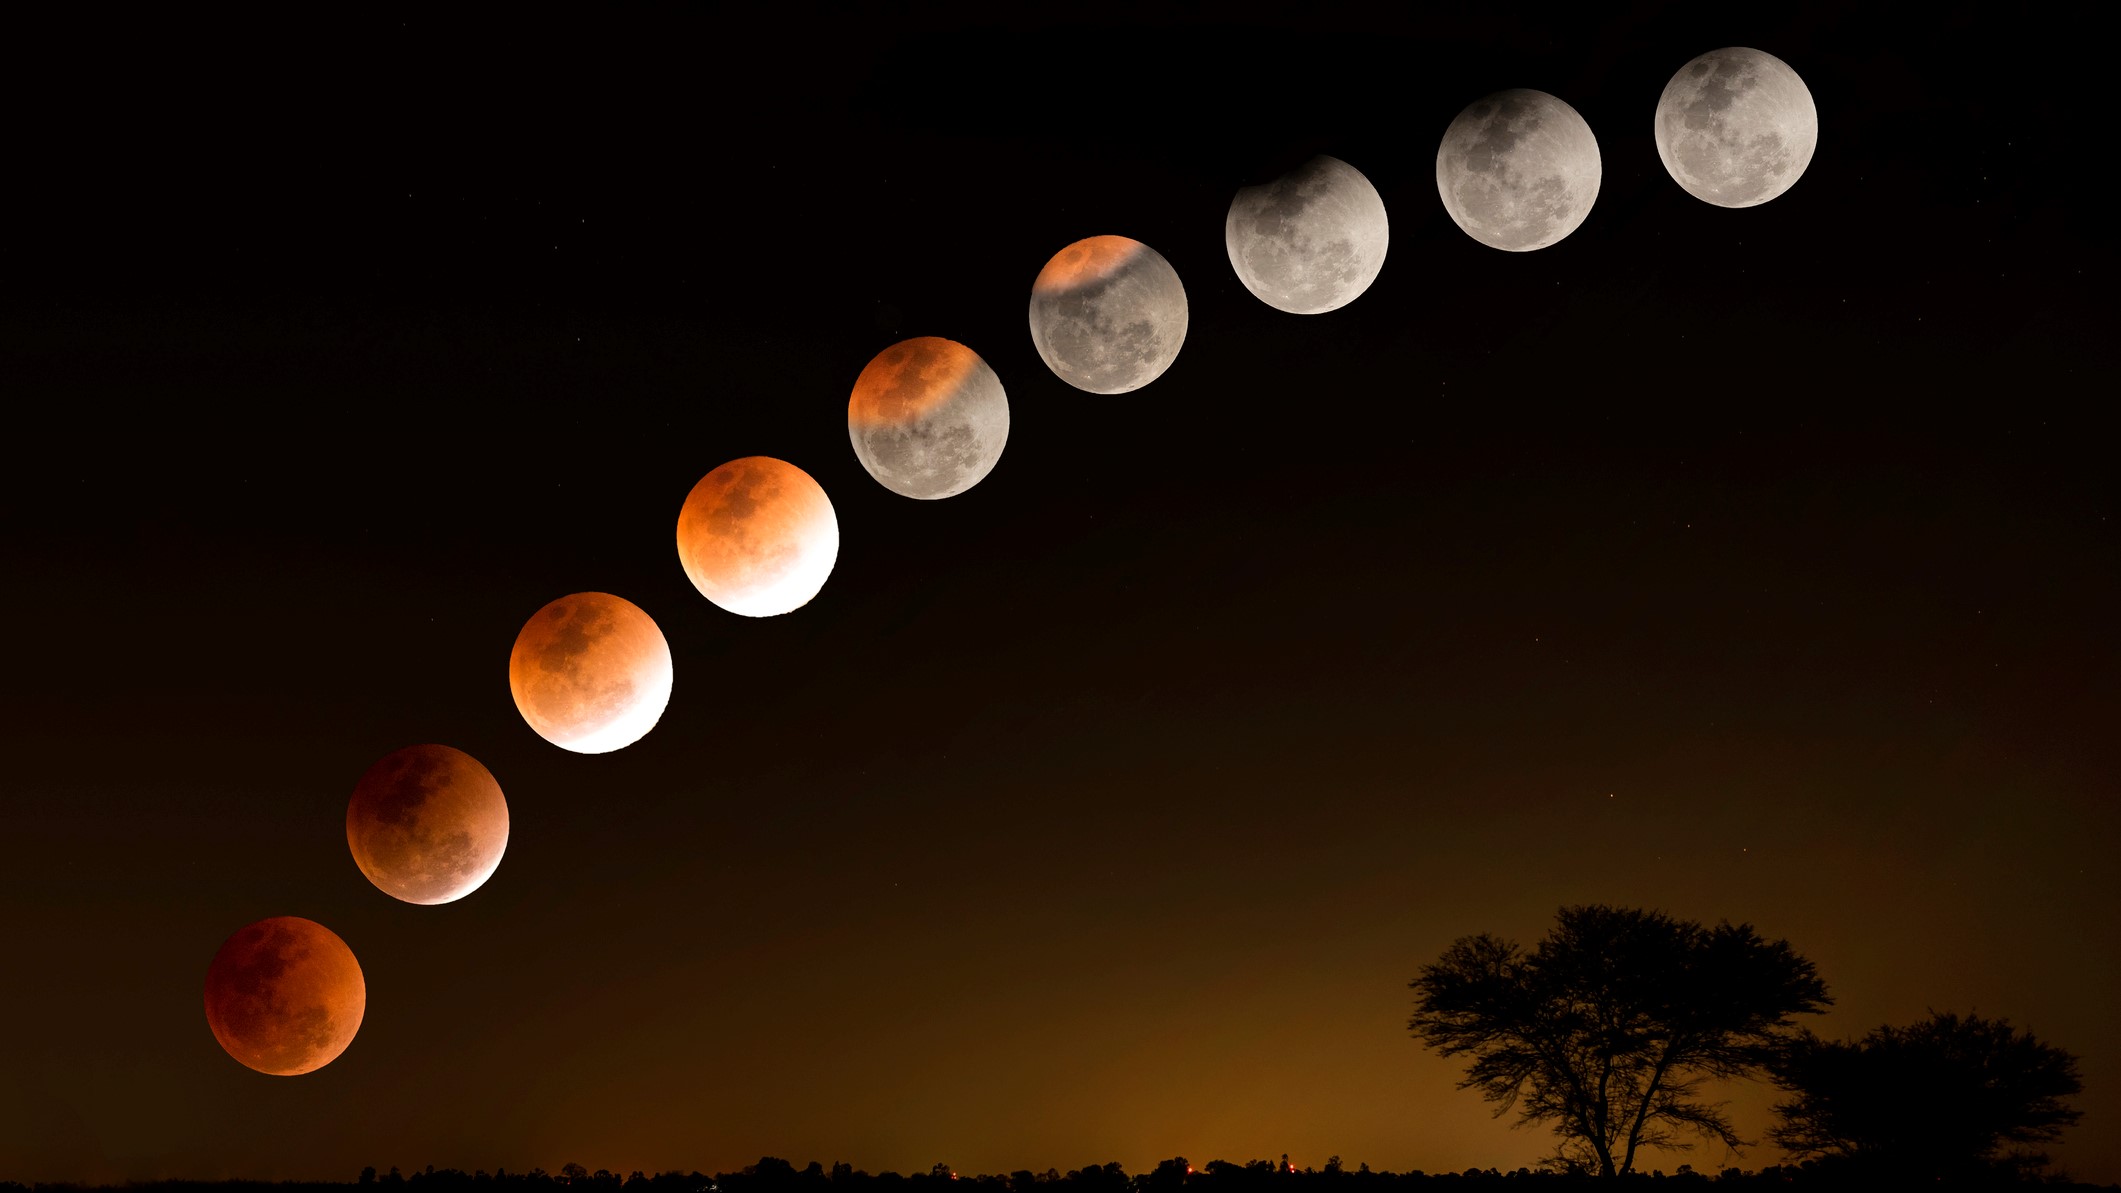 Lunar eclipse 2022 guide: When, where & how to see them